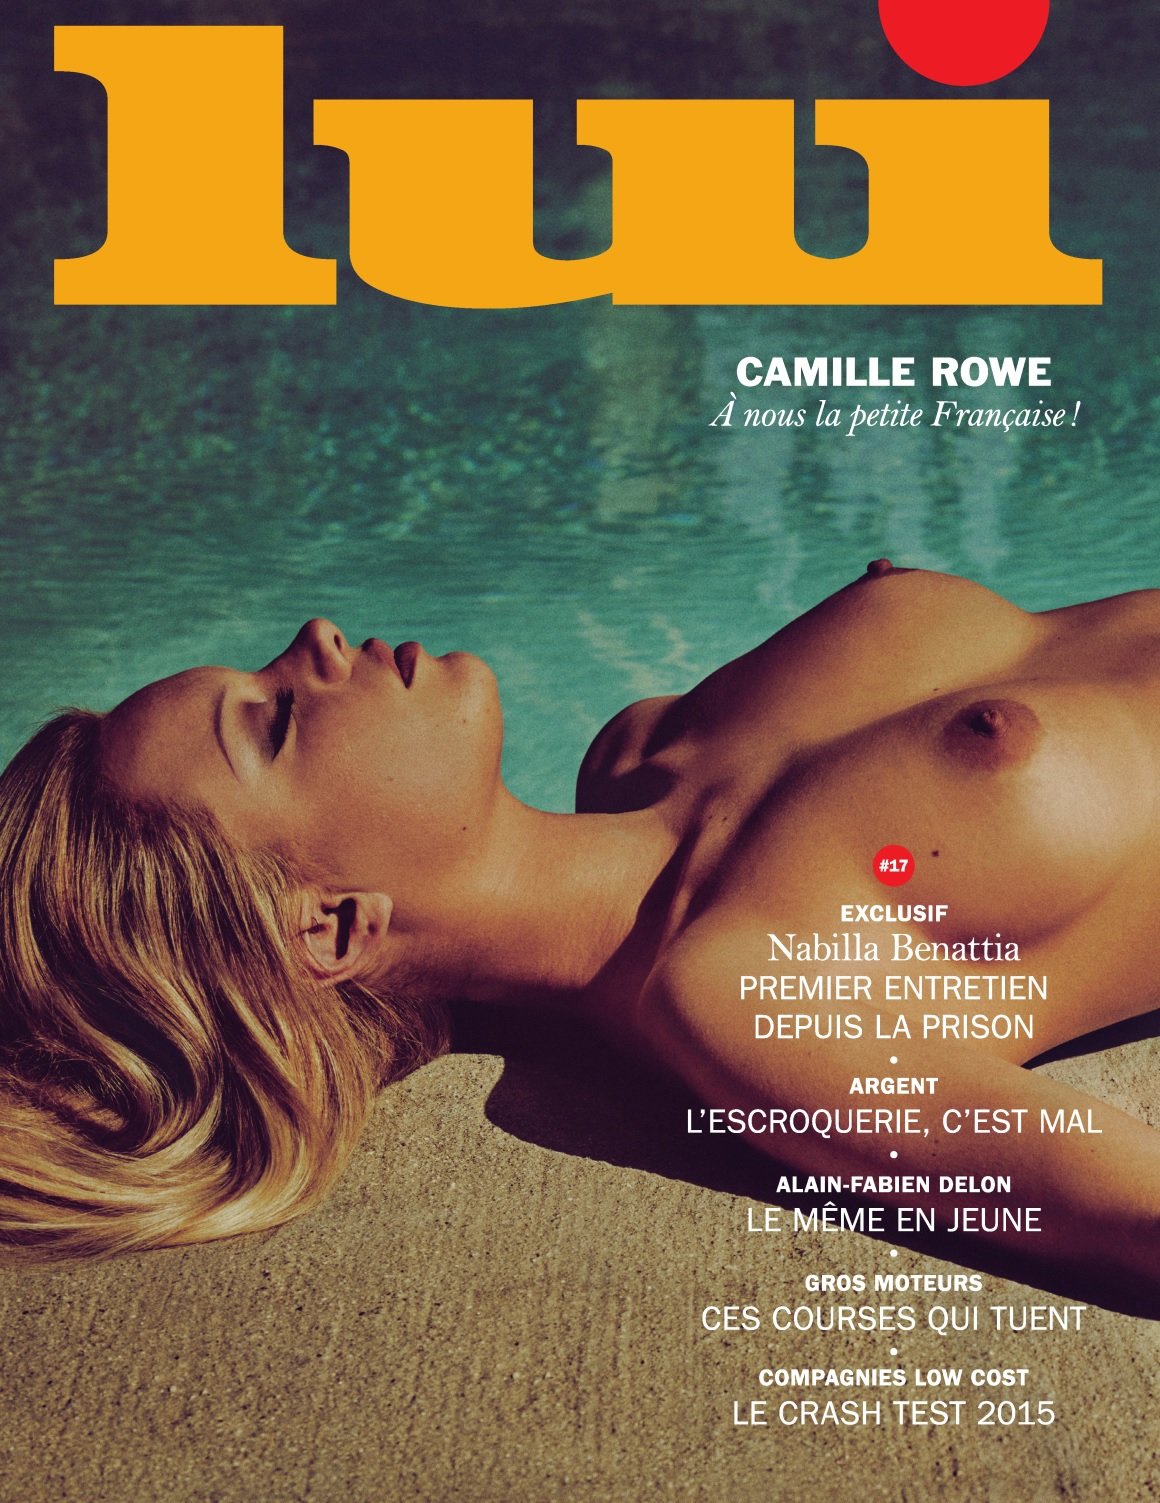 Camille Rowe 7